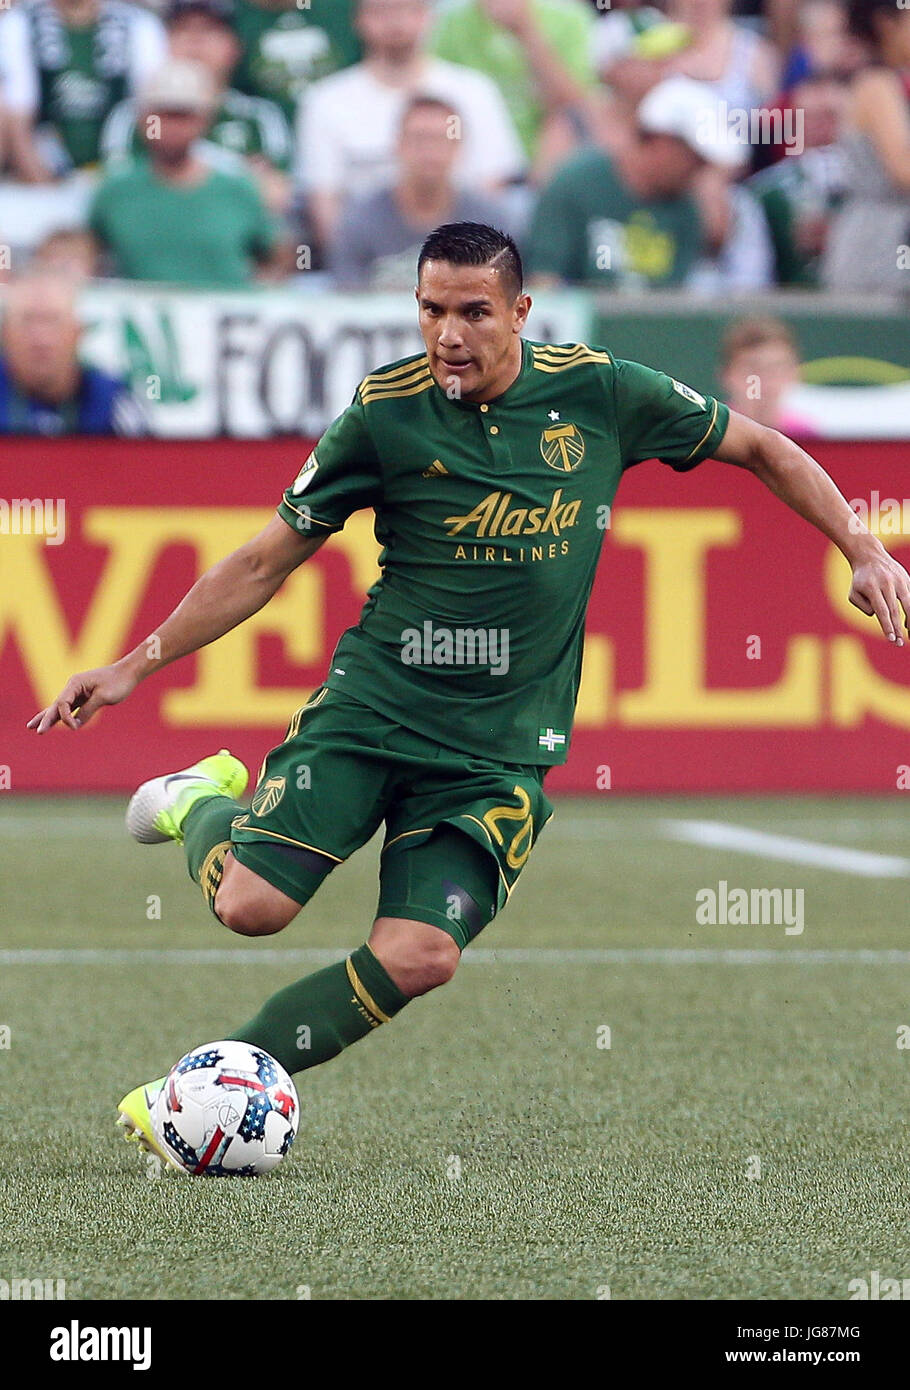 June 25, 2017. Portland Timbers midfielder David Guzman (20) makes a pass during the MLS match between the visiting Seattle Sounders and the Portland Timbers at Providence Park, Portland, OR. Larry C. Lawson/CSM Stock Photo